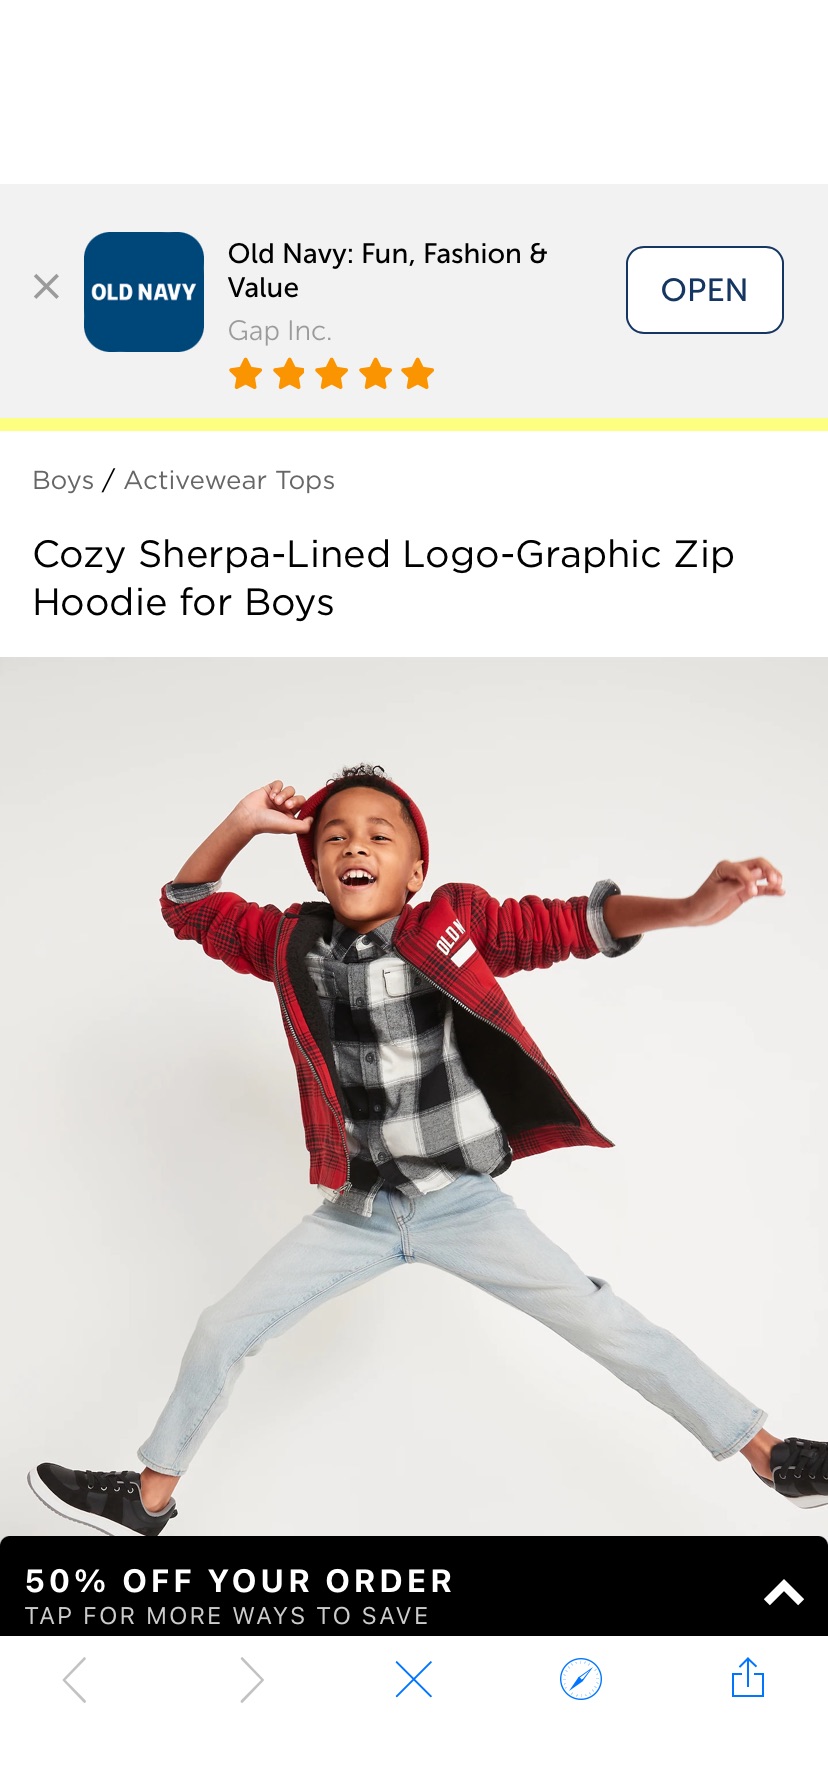 Cozy Sherpa-Lined Logo-Graphic Zip Hoodie for Boys | Old Navy男童加绒外套只要7.48，码全